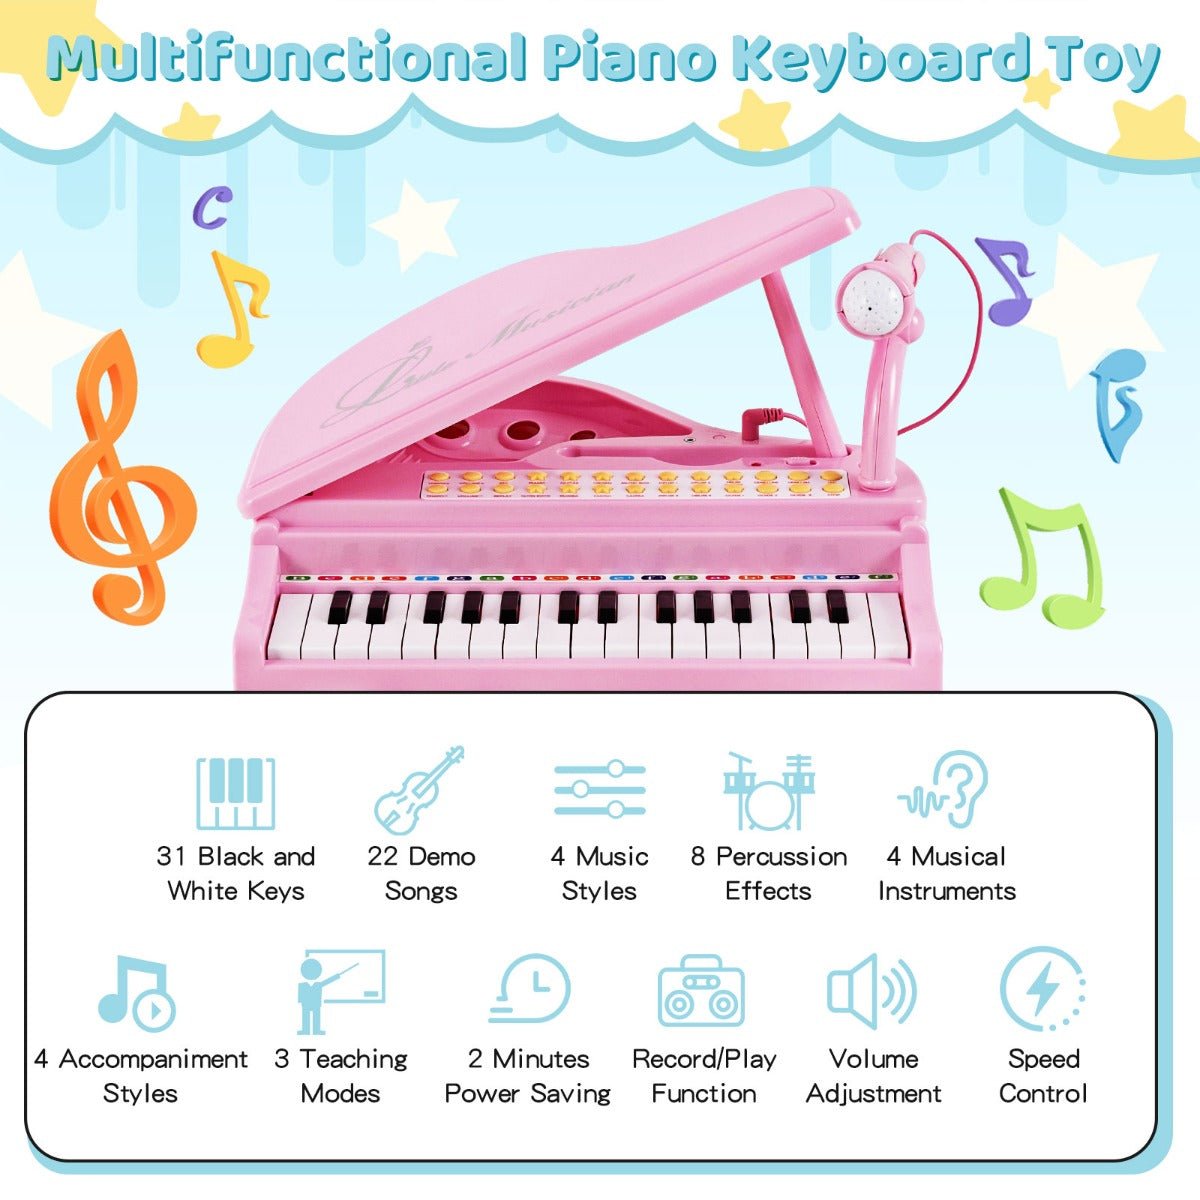 Kids Mega Mart: Your Destination for Musical Fun with Pink Keyboards